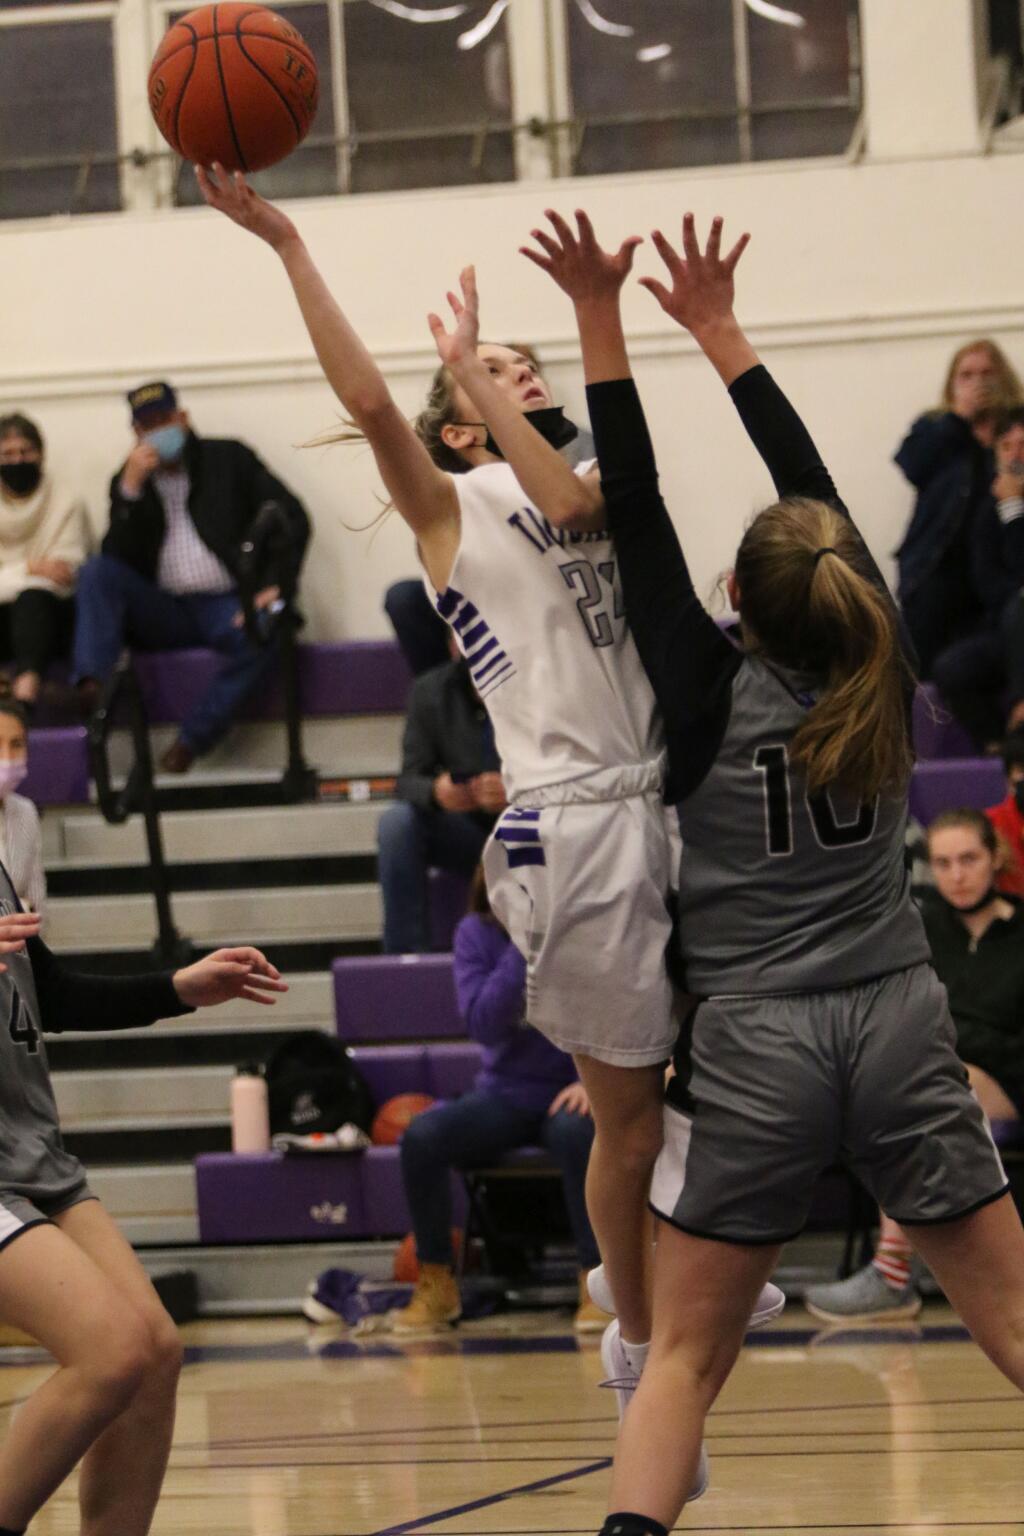 Petaluma’s Brooke Baxman puts up a shot in a game against West County. Baxman scored nine points, but West County won the game. (DWIGHT SUGIOKA / FOR THE ARGUS-COURIER)